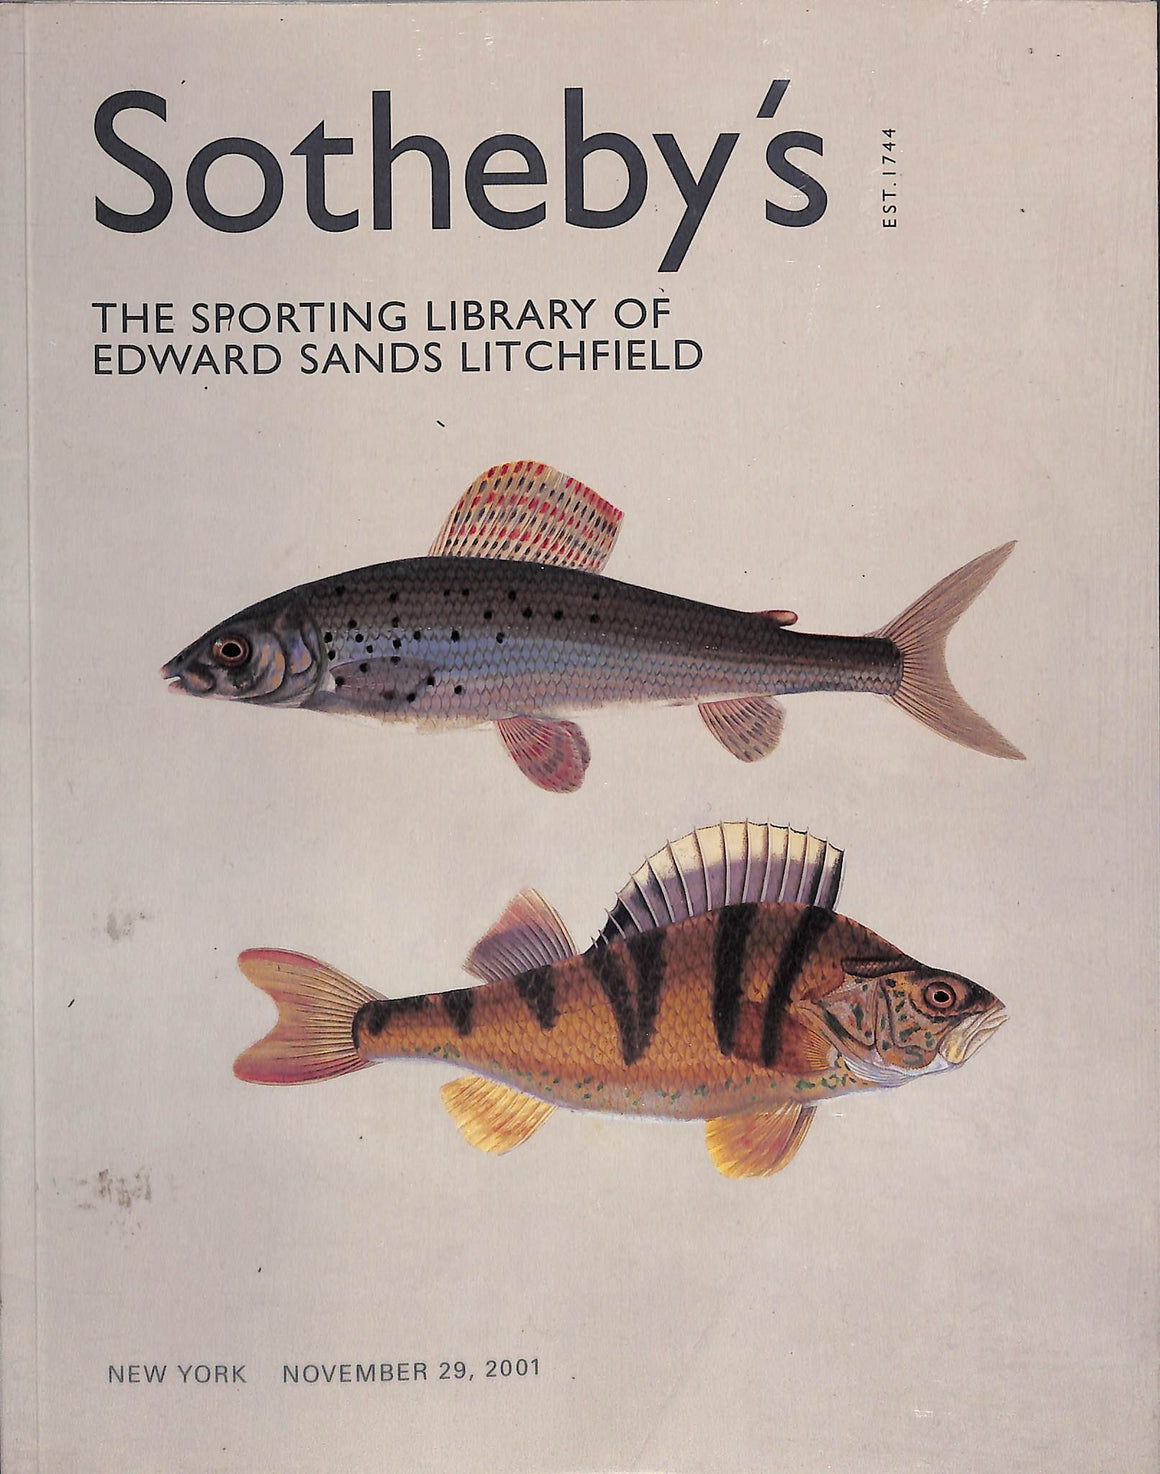 "The Sporting Library Of Edward Sands Litchfield" 2001 Sotheby's